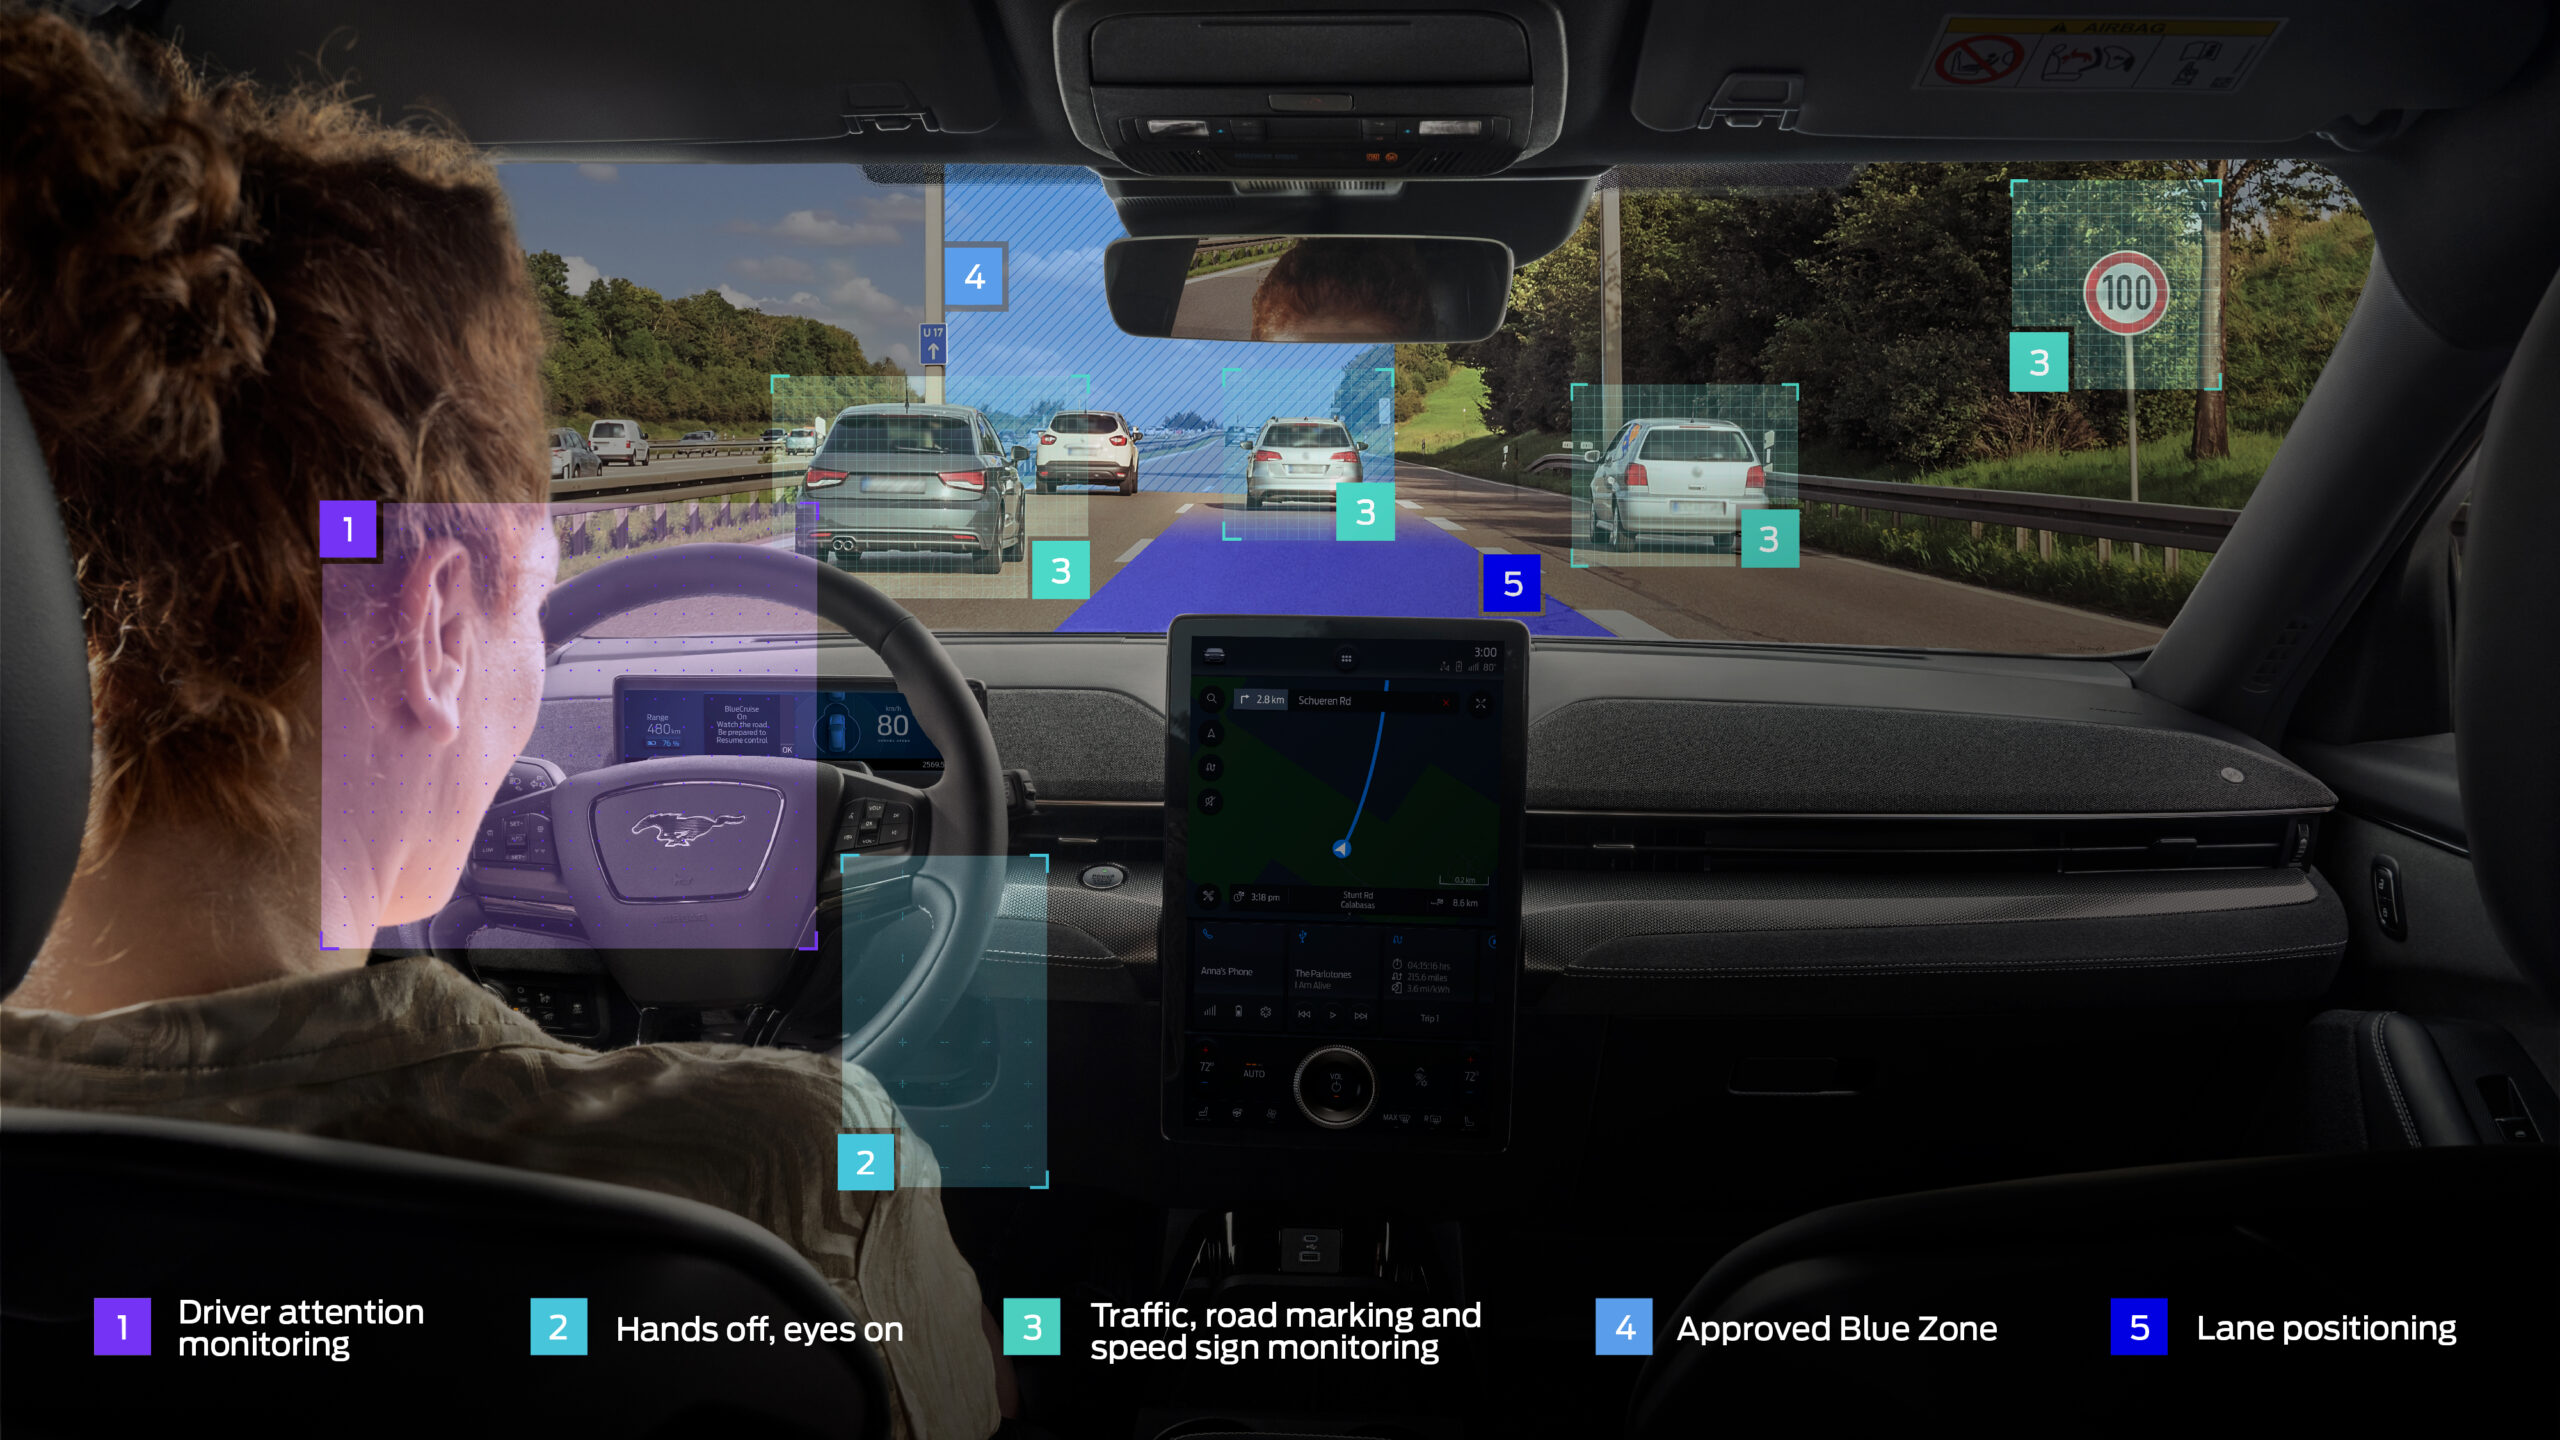 Operating up to a maximum speed of 80 mph (130 km/h), BlueCruise uses a combination of radars and cameras to detect and track the position and speed of other vehicles on the road